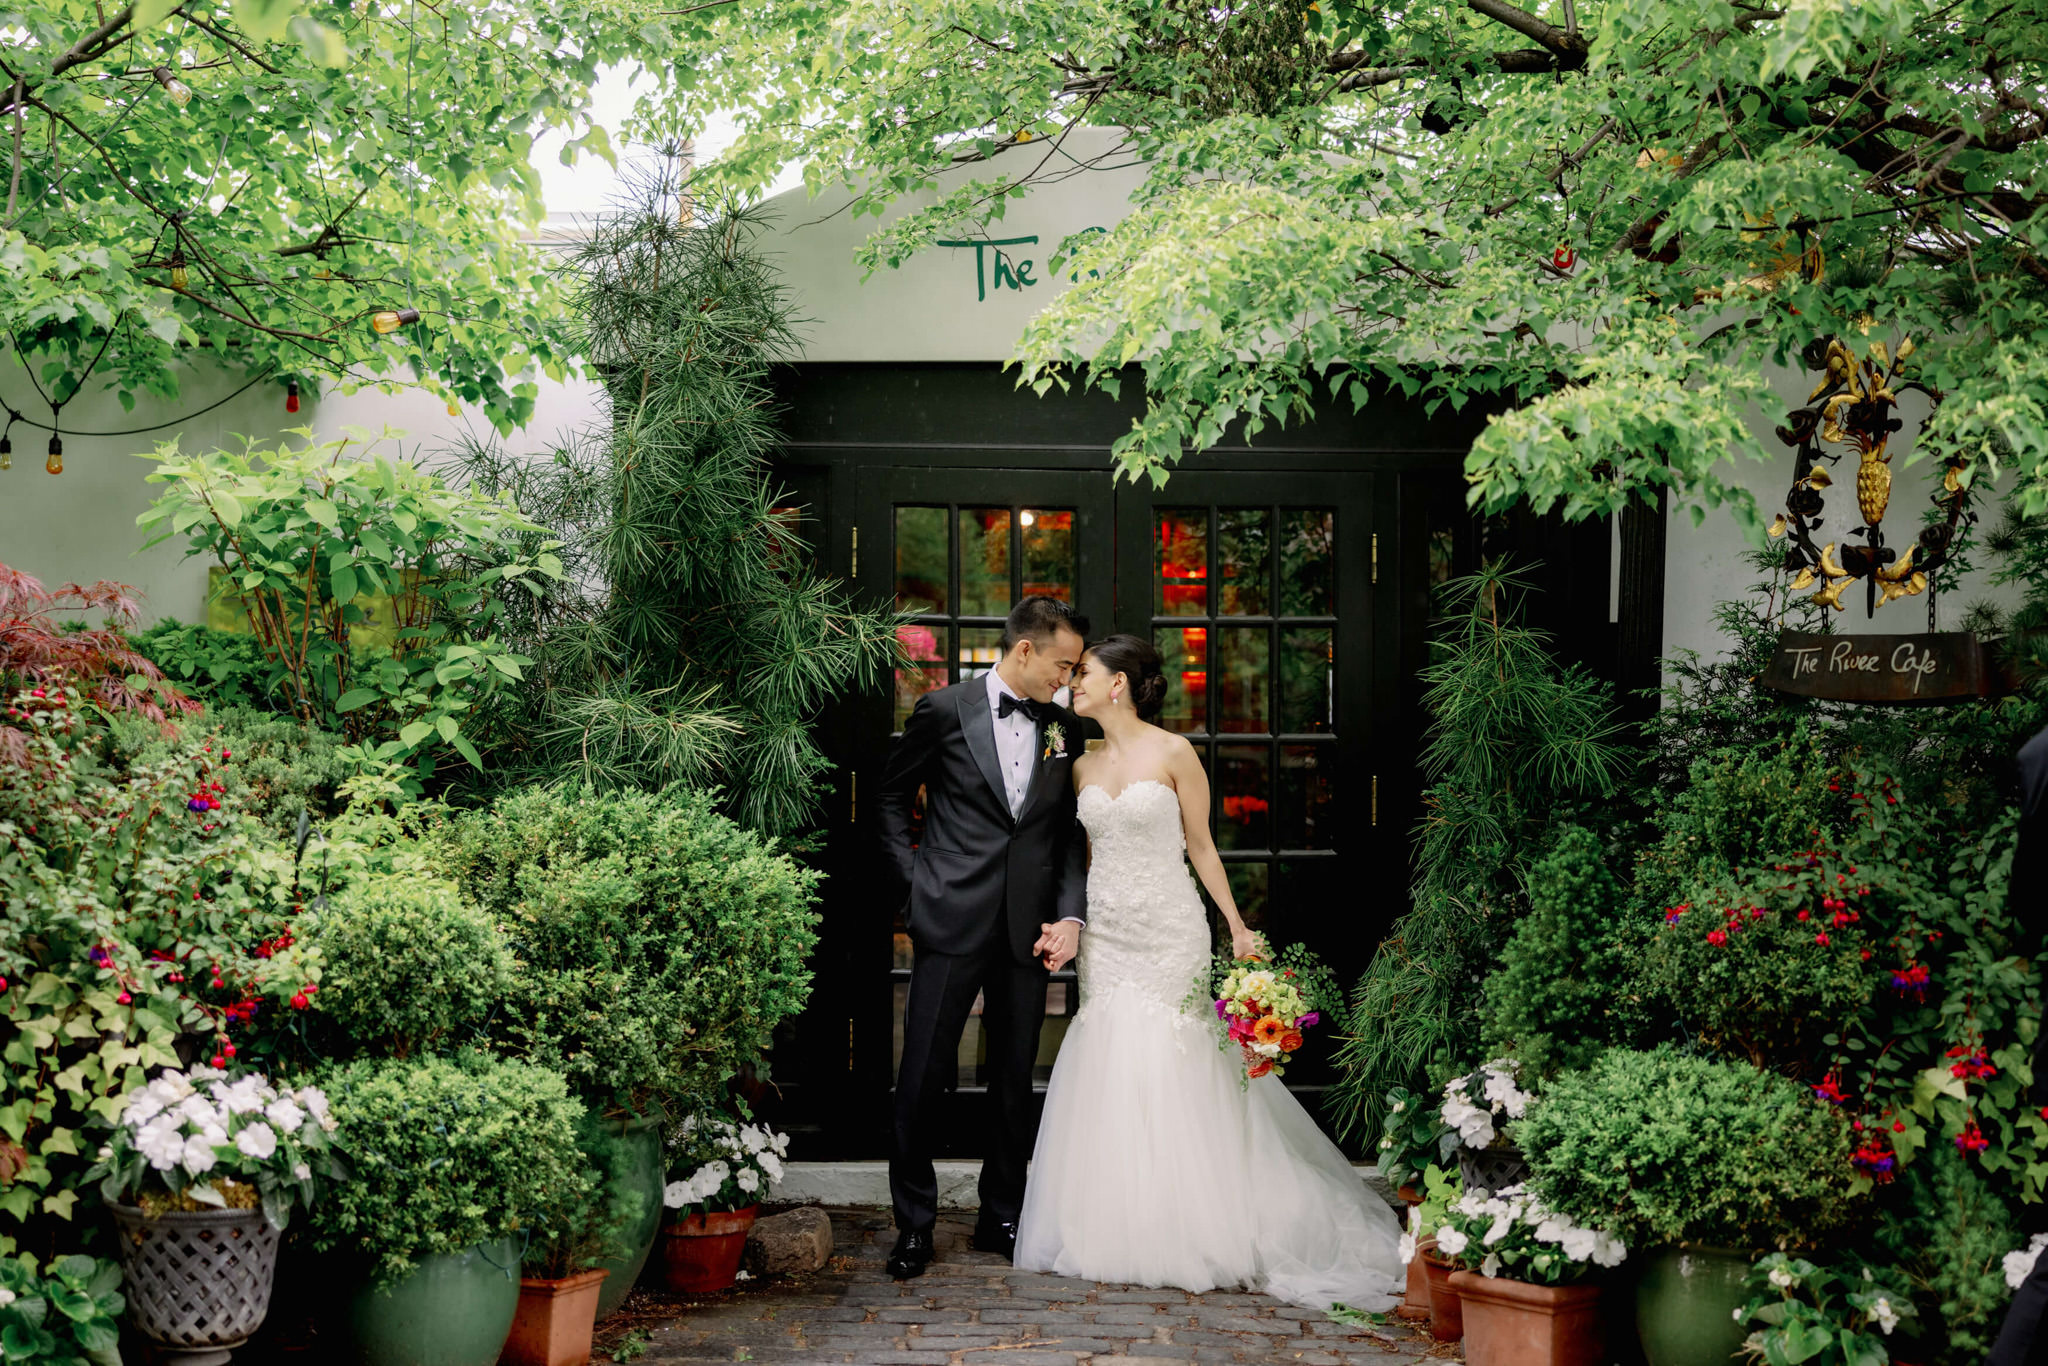 The bride and groom are staring at each other close in front of The River Cafe entrance. Editorial wedding image by Jenny Fu Studio